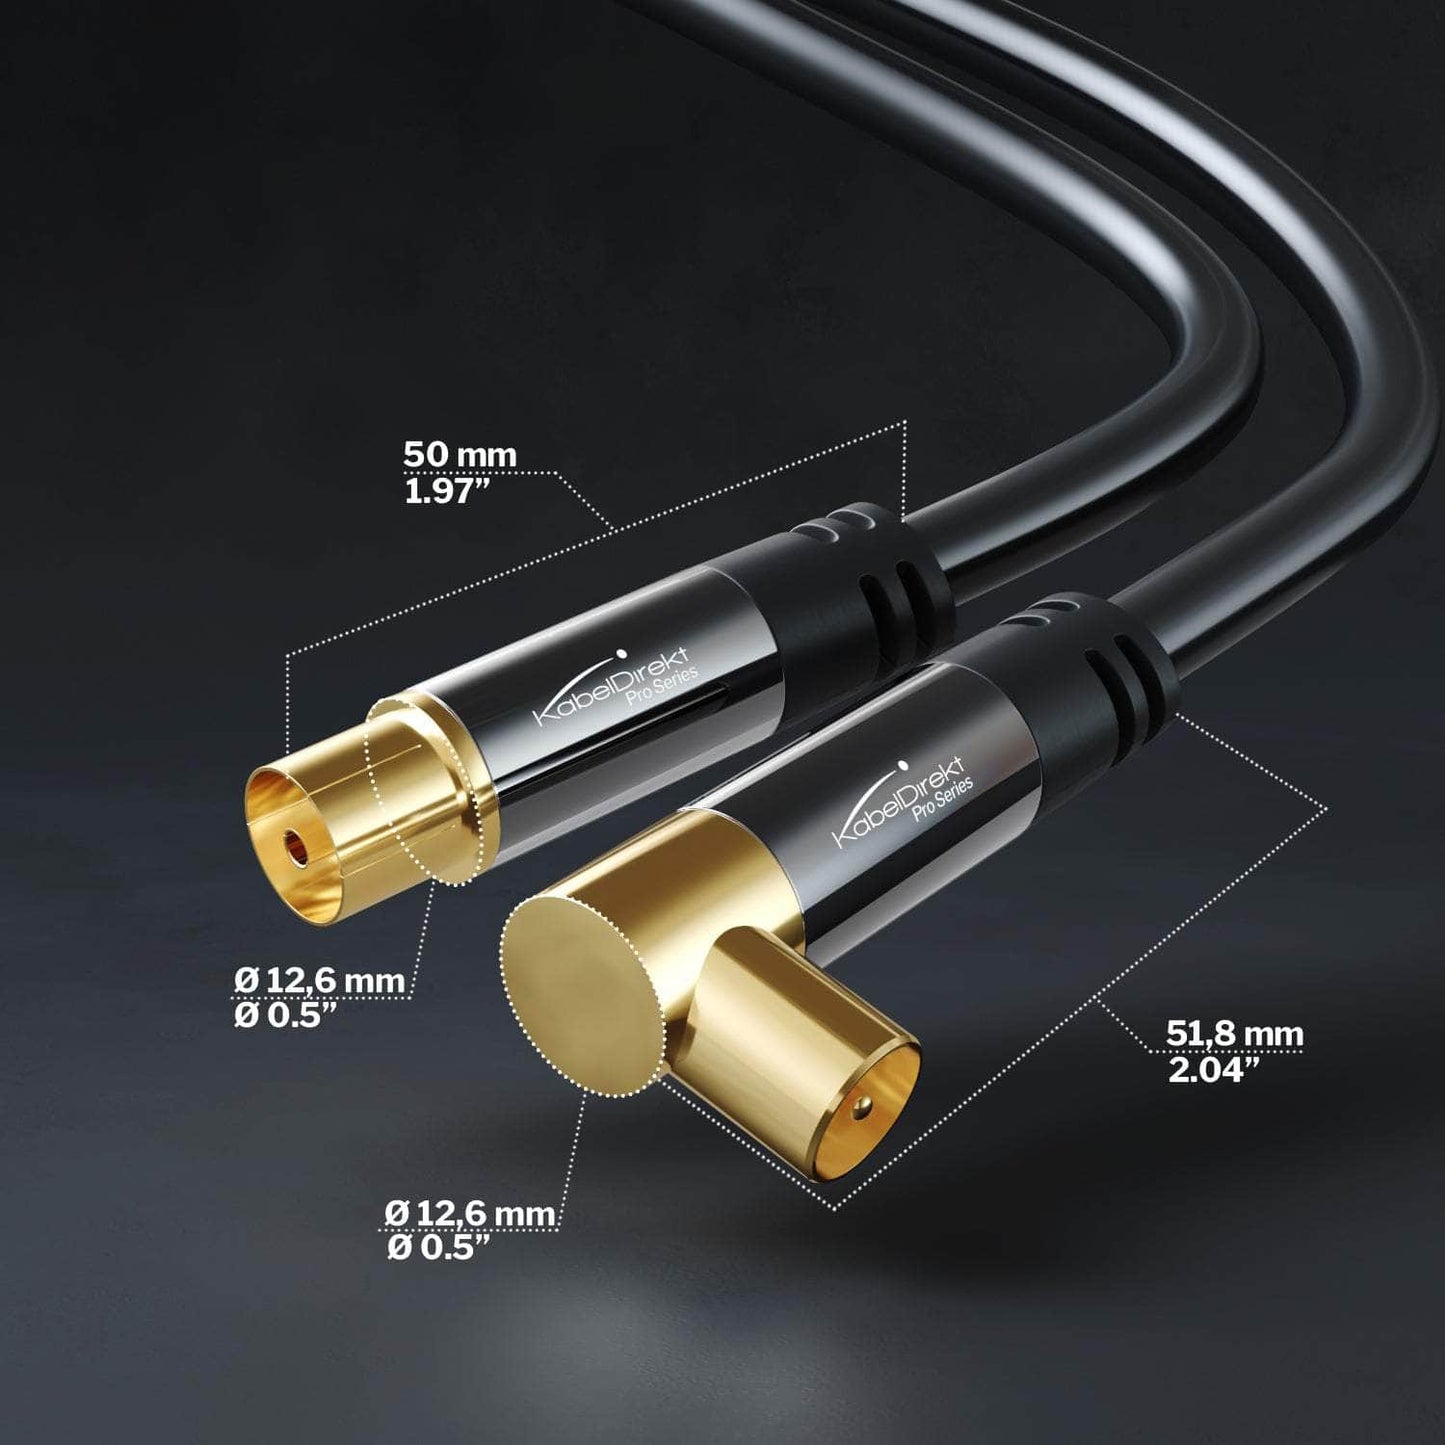 HDTV aerial / coaxial cable - 90° angled male connector to straight female connector